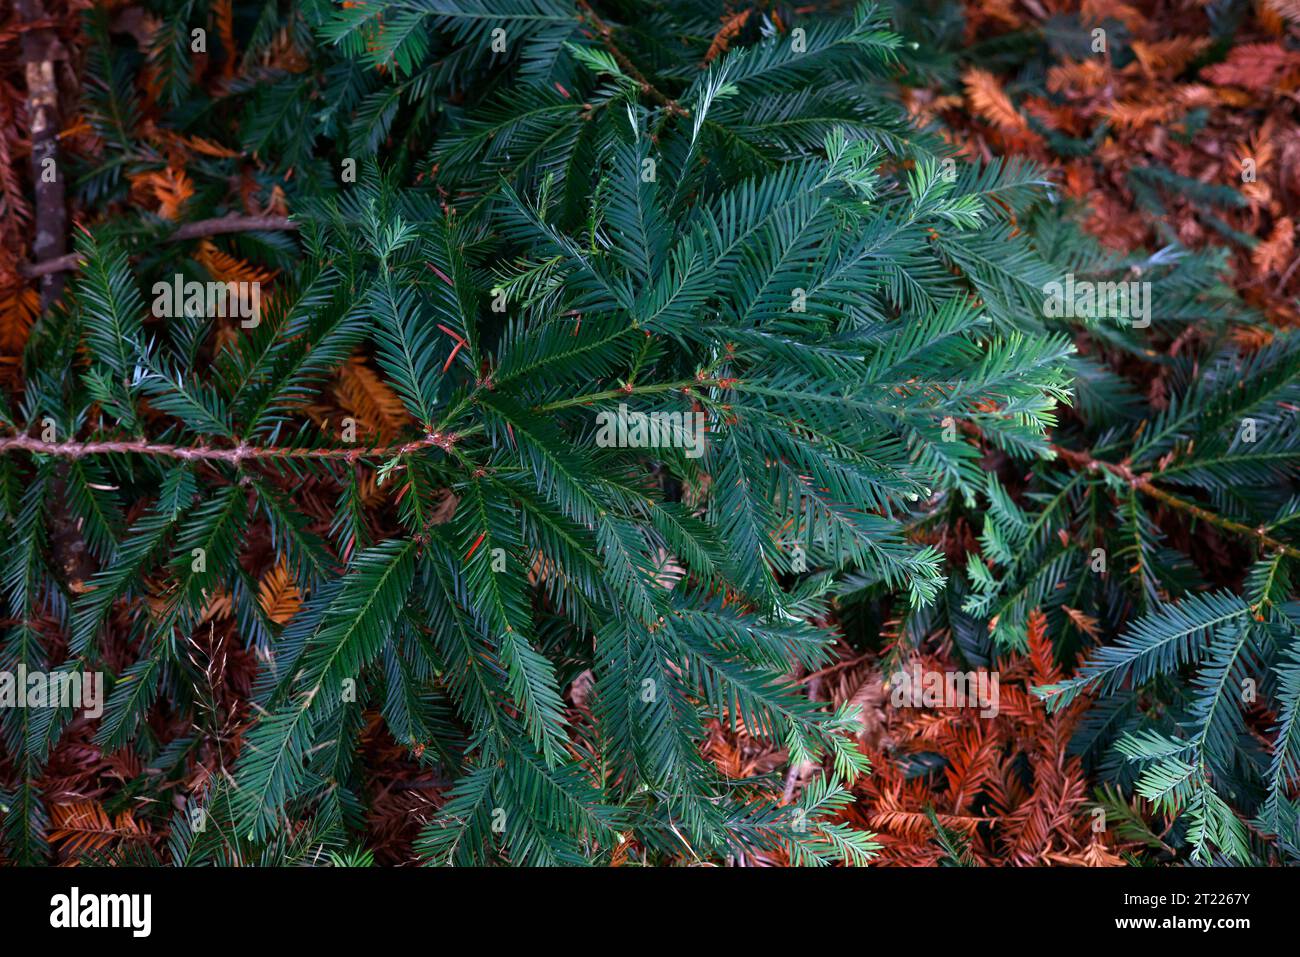 Closeup of the dark green pine-needle leaves of the evergreen conifersequoia sempervirens. Stock Photo